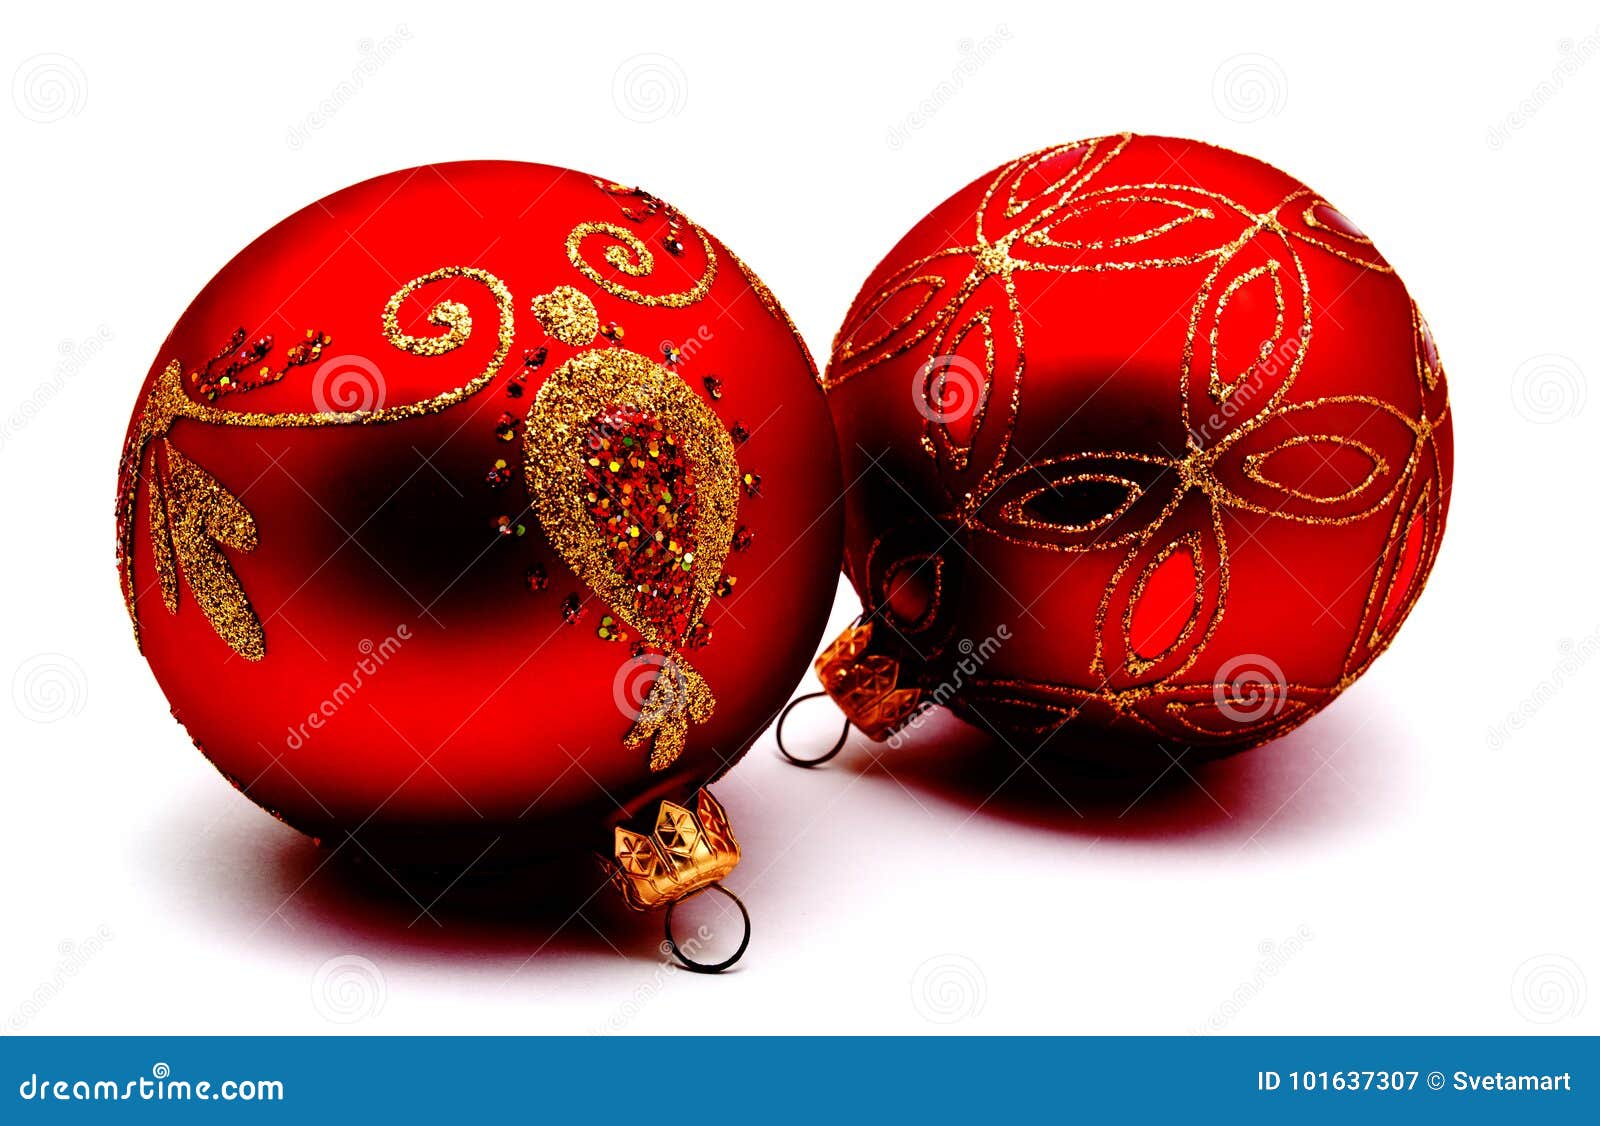 Christmas Decoration Red Balls Isolated on a White Stock Image - Image ...